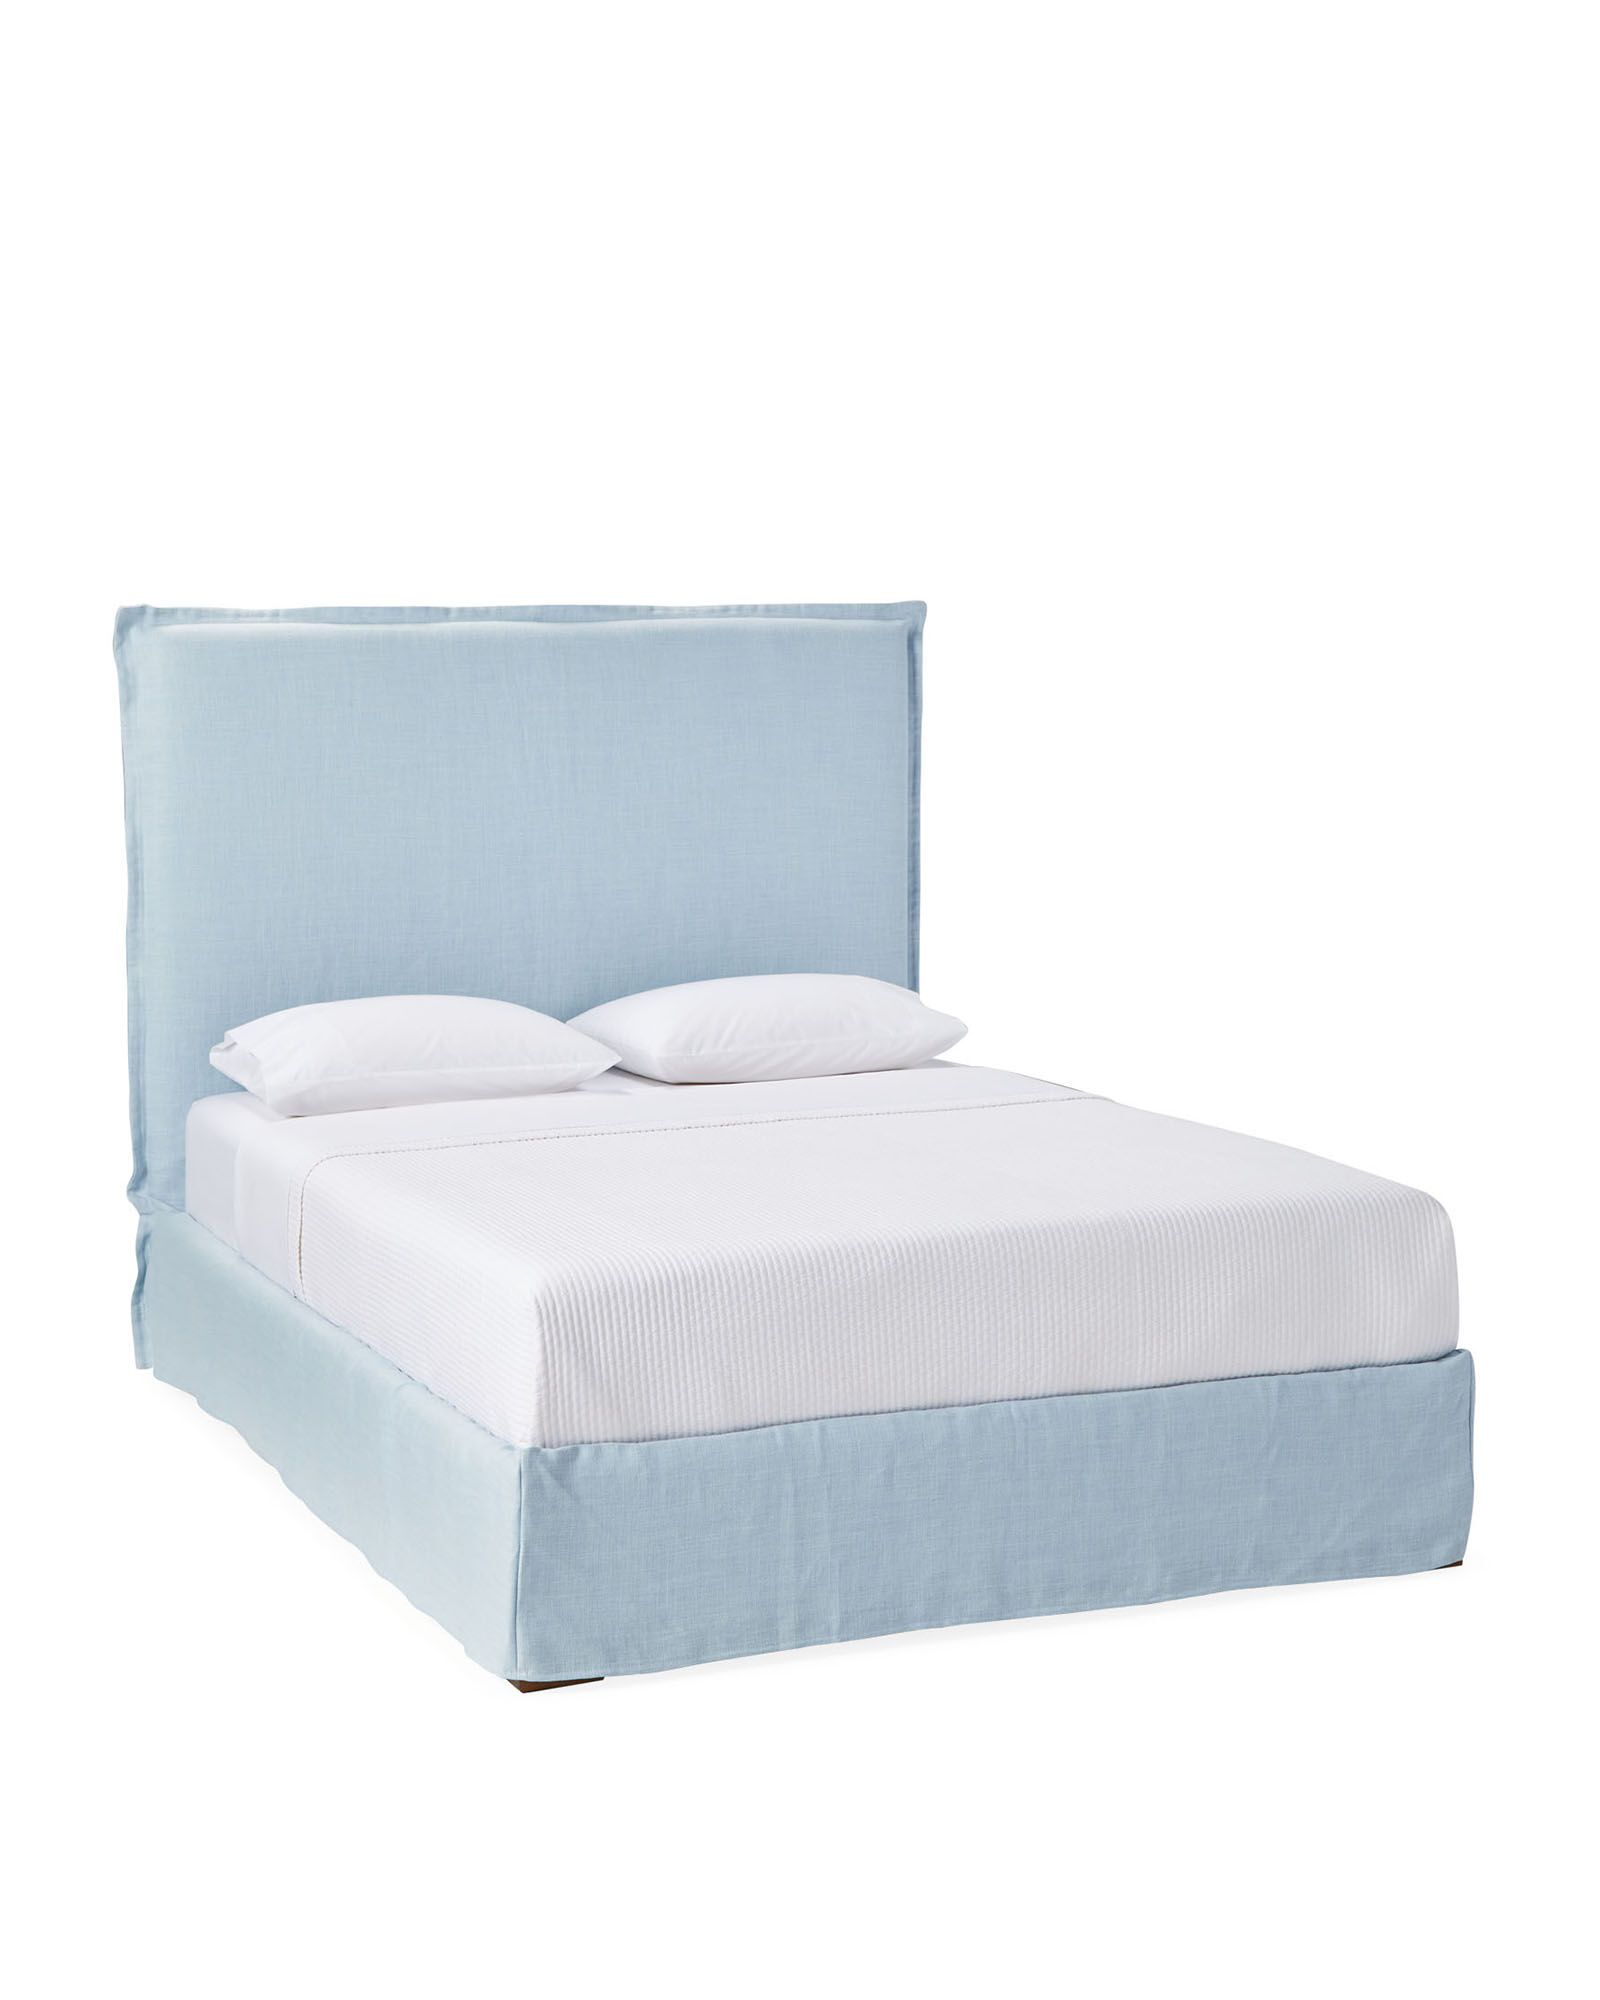 Beach House Slipcovered Bed - Sky Washed Linen | Serena and Lily